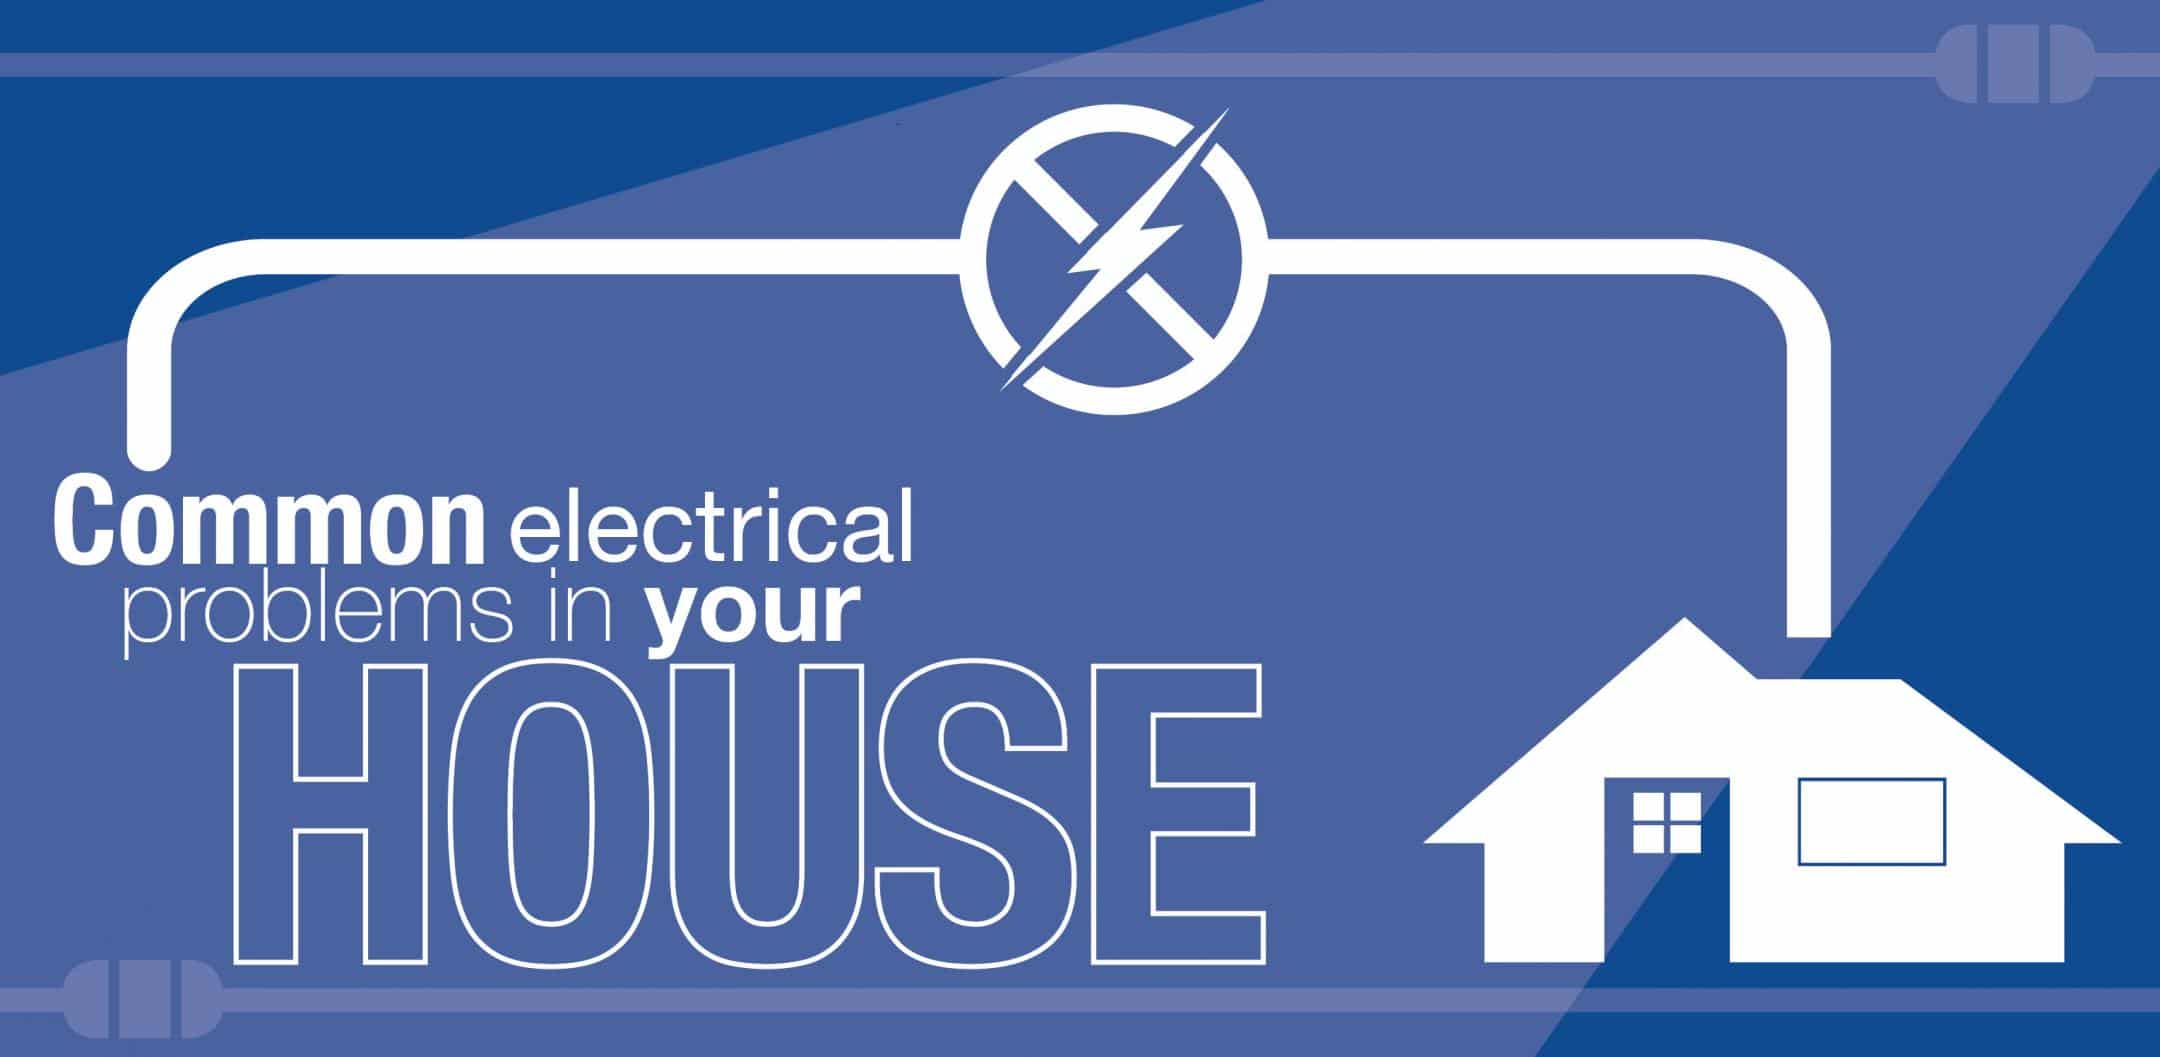 What are the 10 most common electrical problems in the typical home?